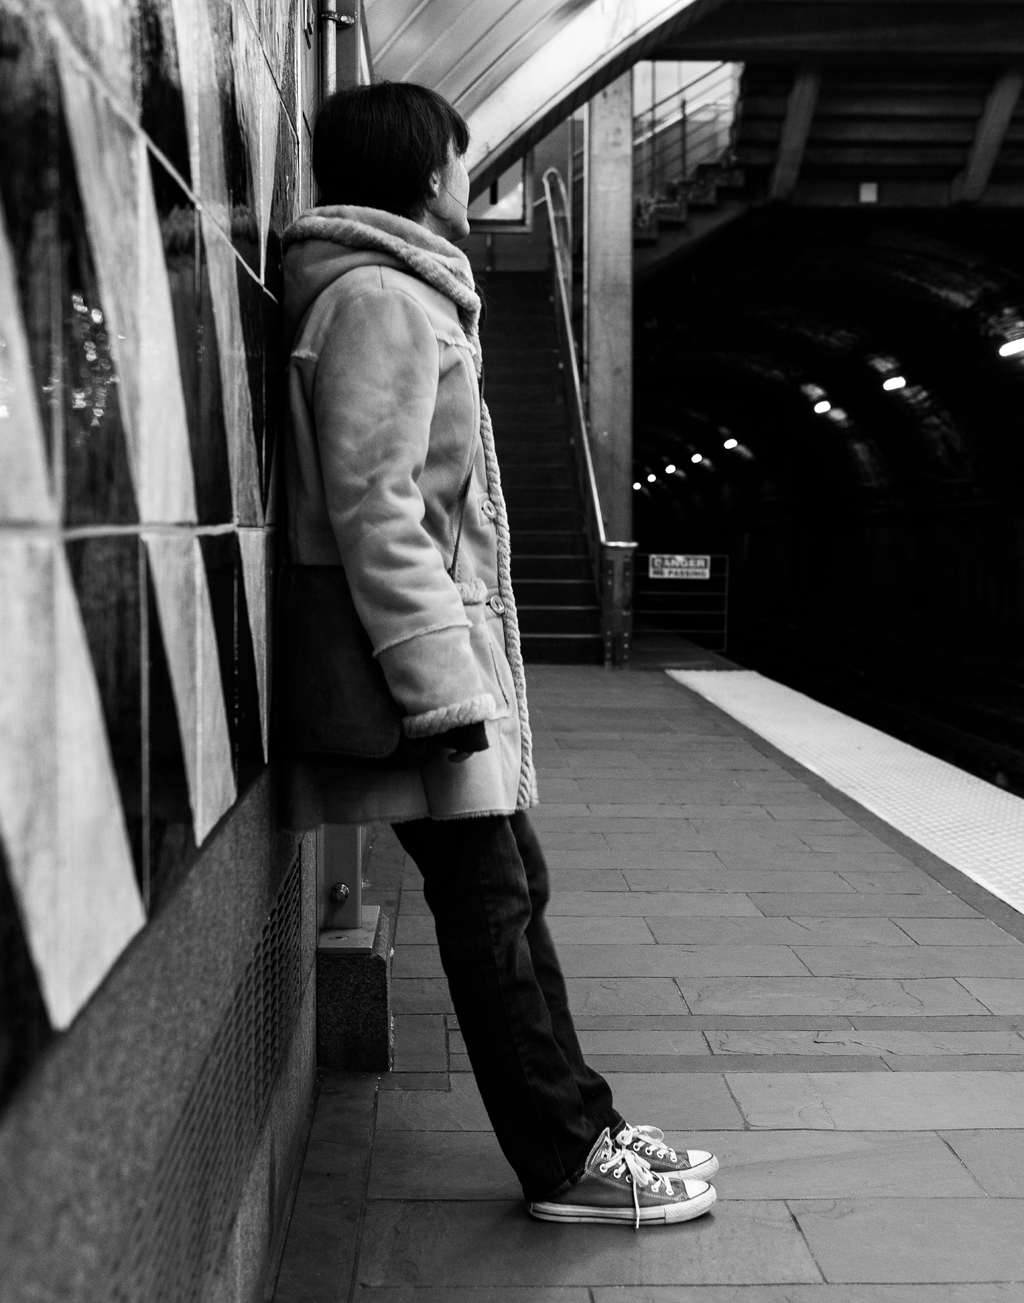 Waiting on the T